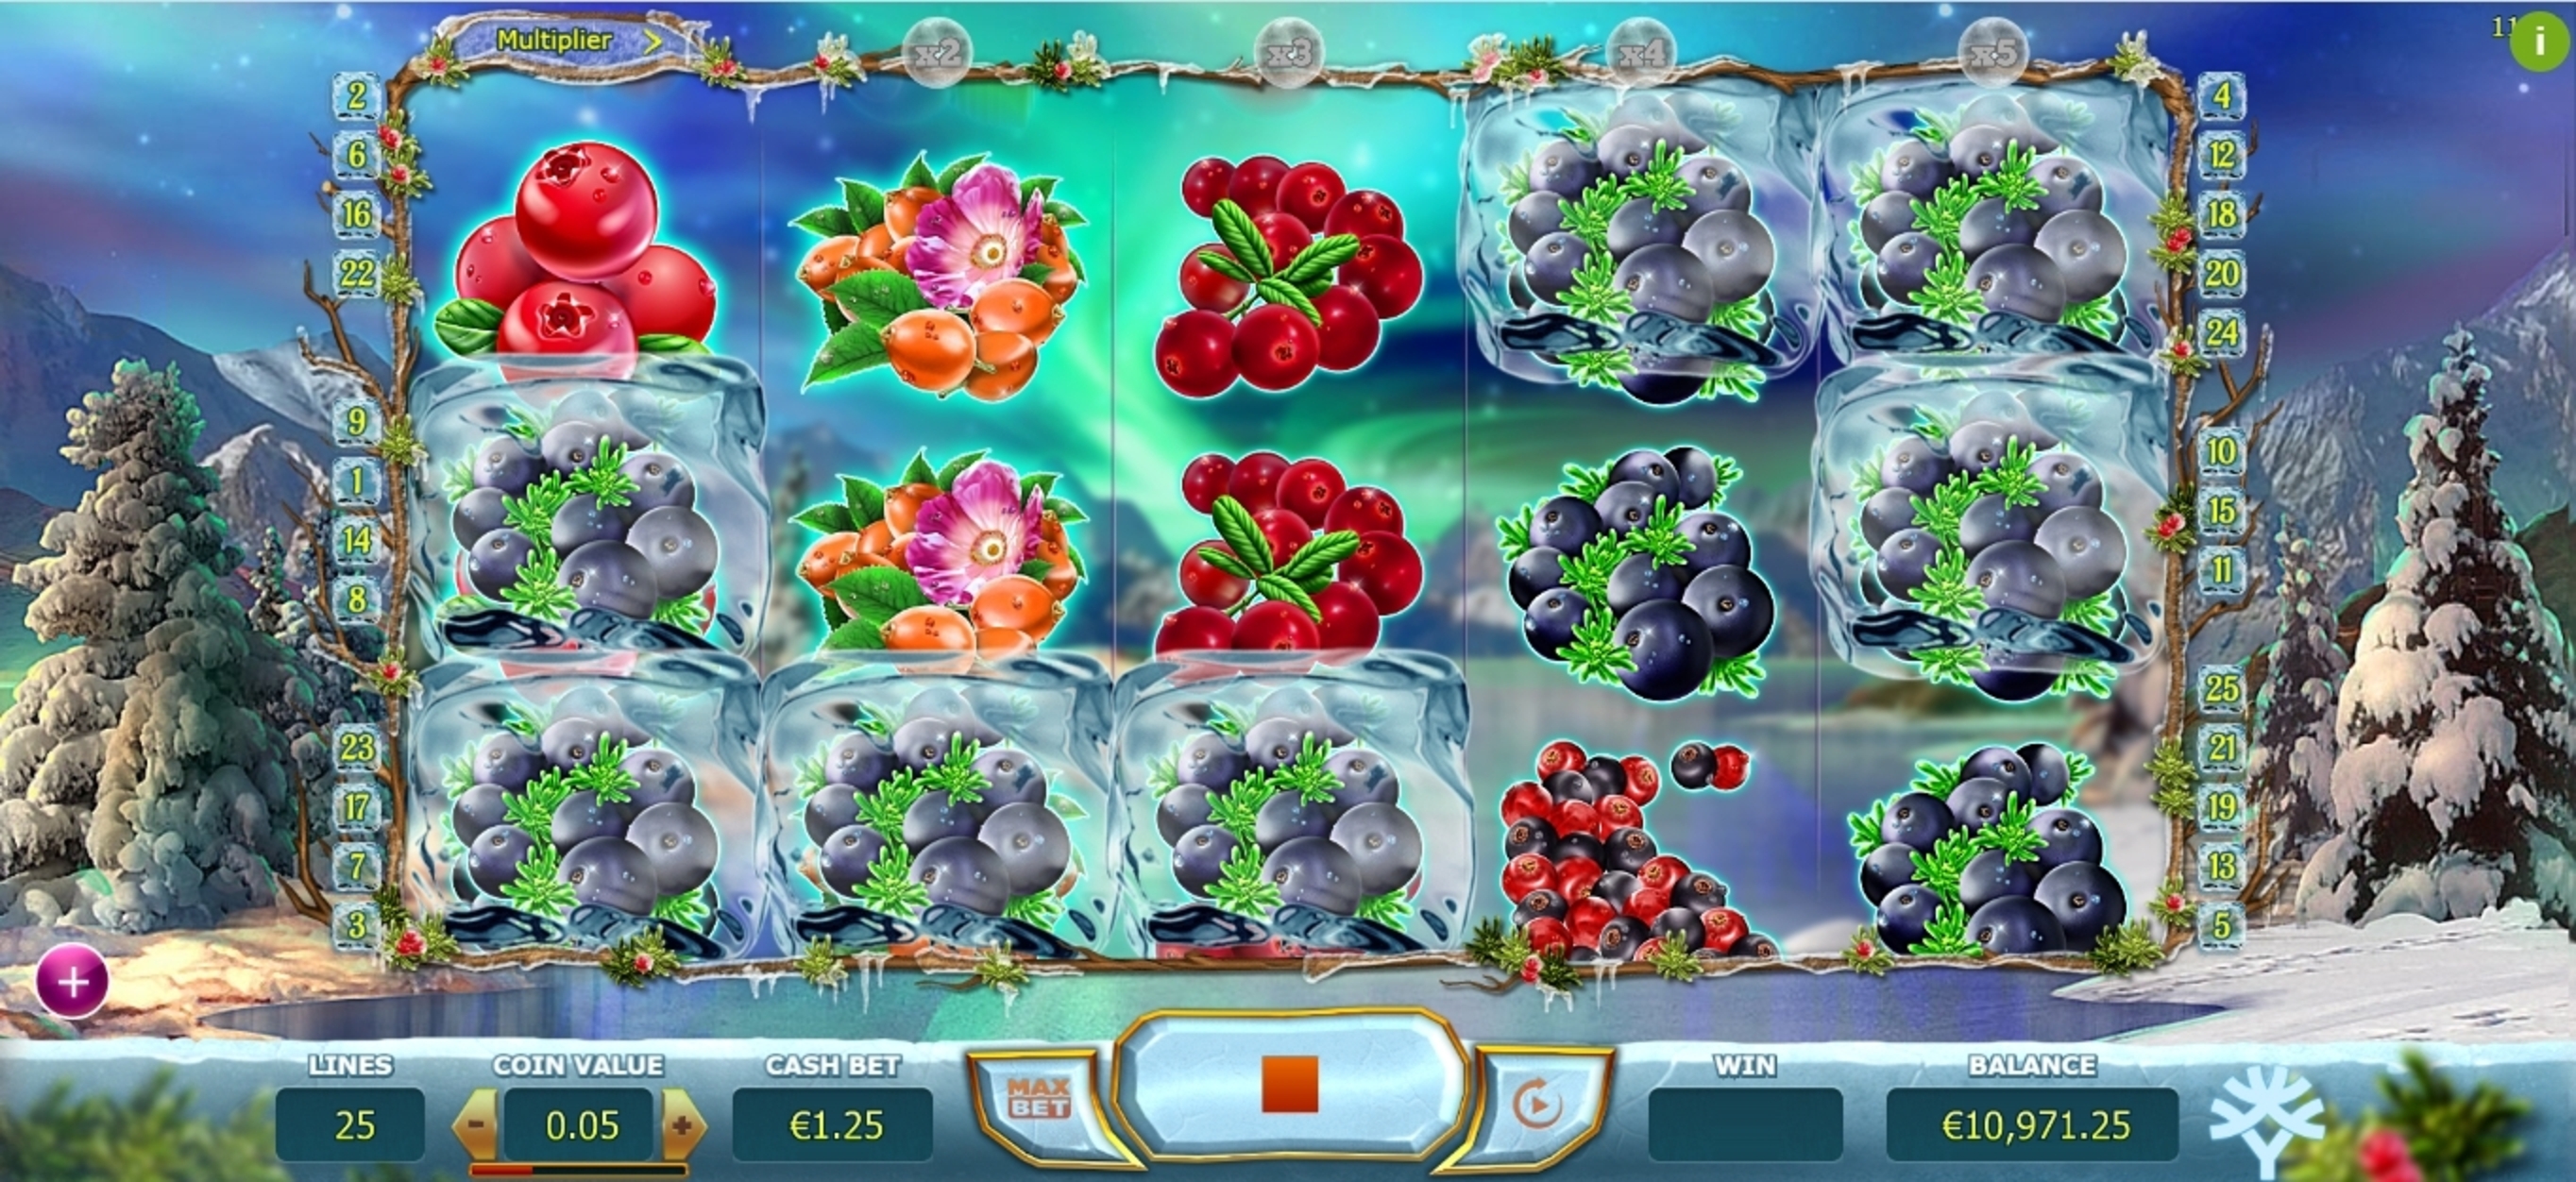 Win Money in Winter Berries Free Slot Game by Yggdrasil Gaming